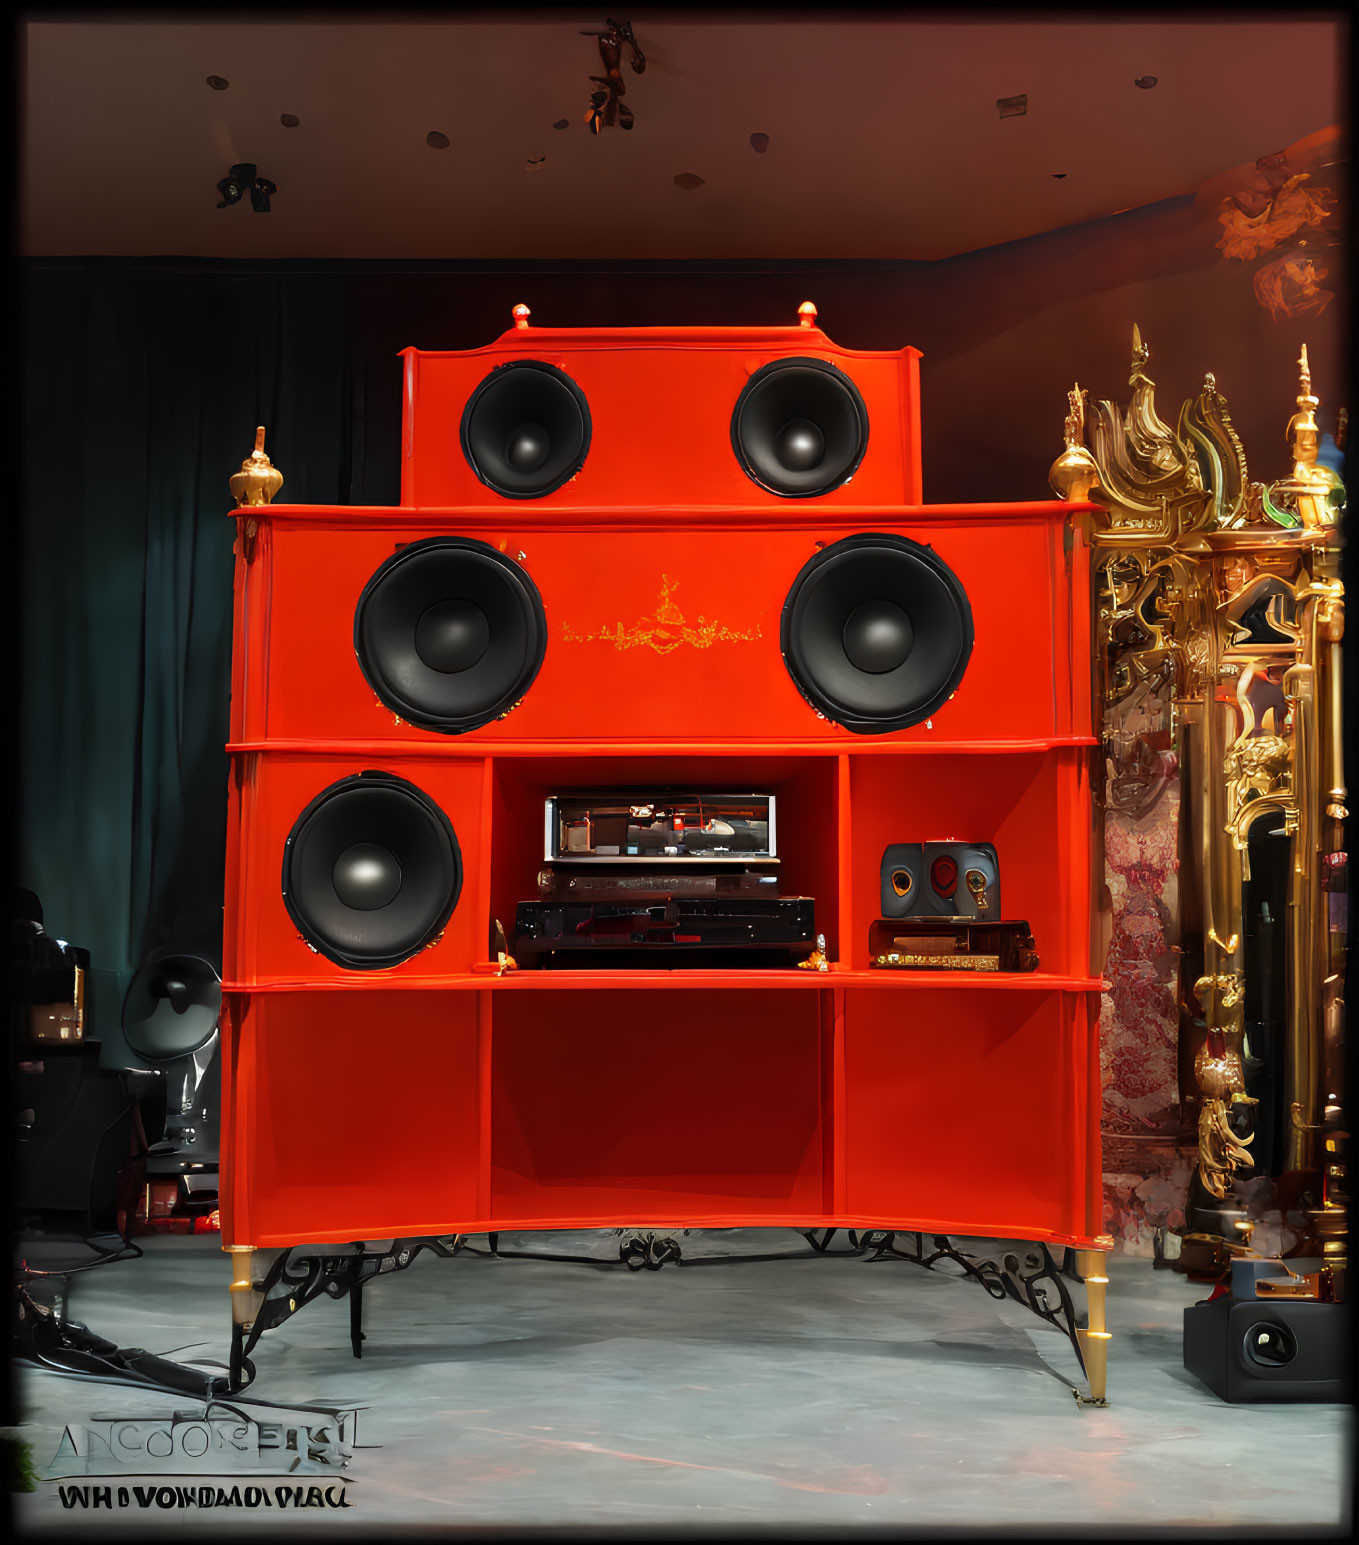 Luxurious Room with Vibrant Red Audiophile Hi-Fi Stereo System